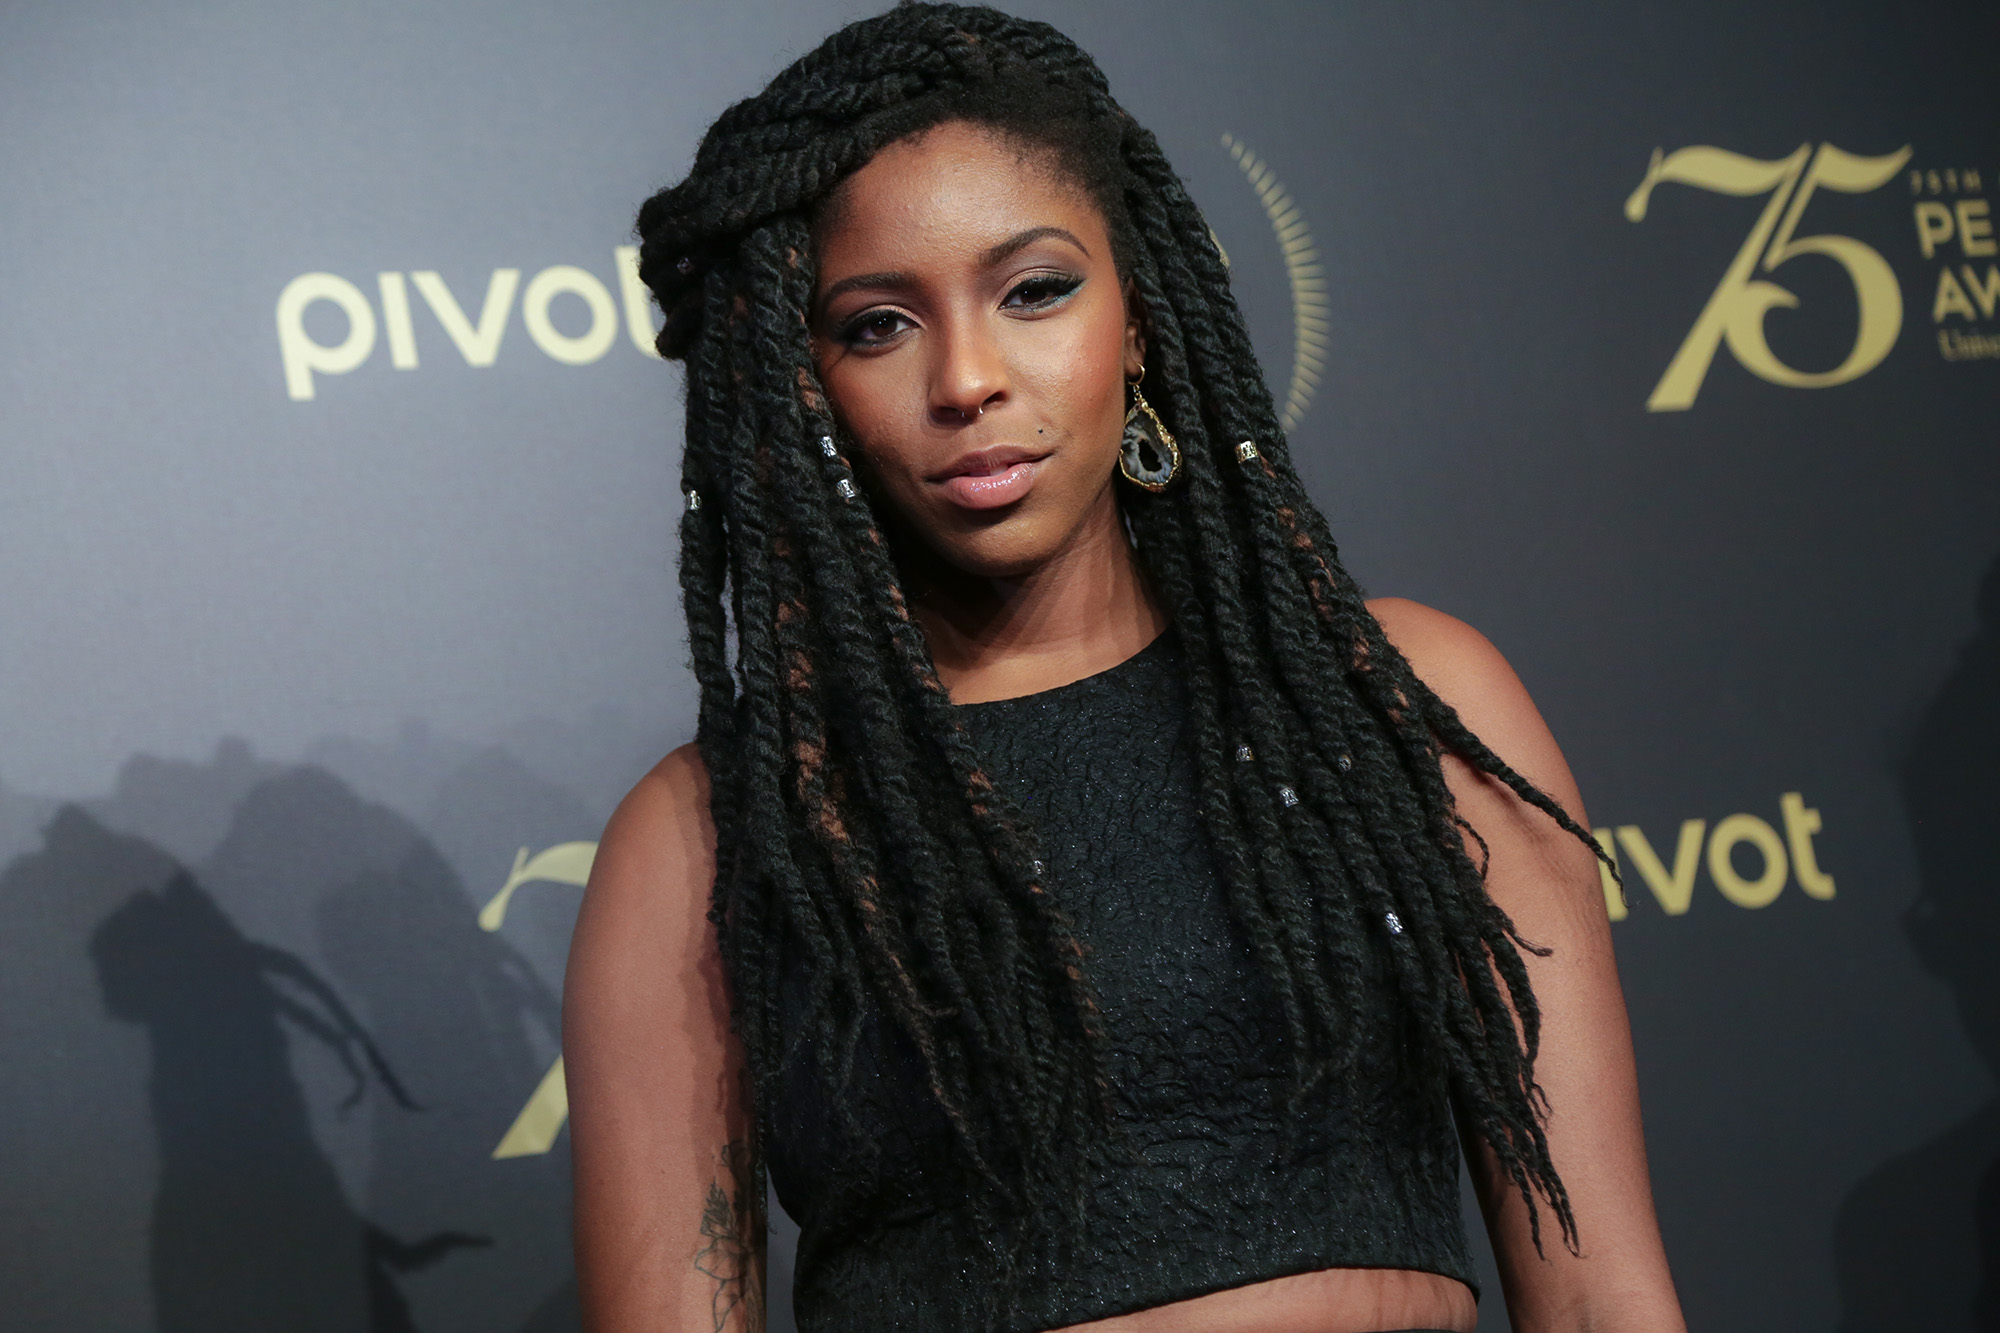 Correspondent from "The Daily Show" Jessica Williams attends the 75th Annual Peabody Awards Ceremony held at Cipriani Wall Street on May 21, 2016 in New York City.  (Photo by Brent N. Clarke/FilmMagic) (Brent N. Clarke&mdash;FilmMagic)